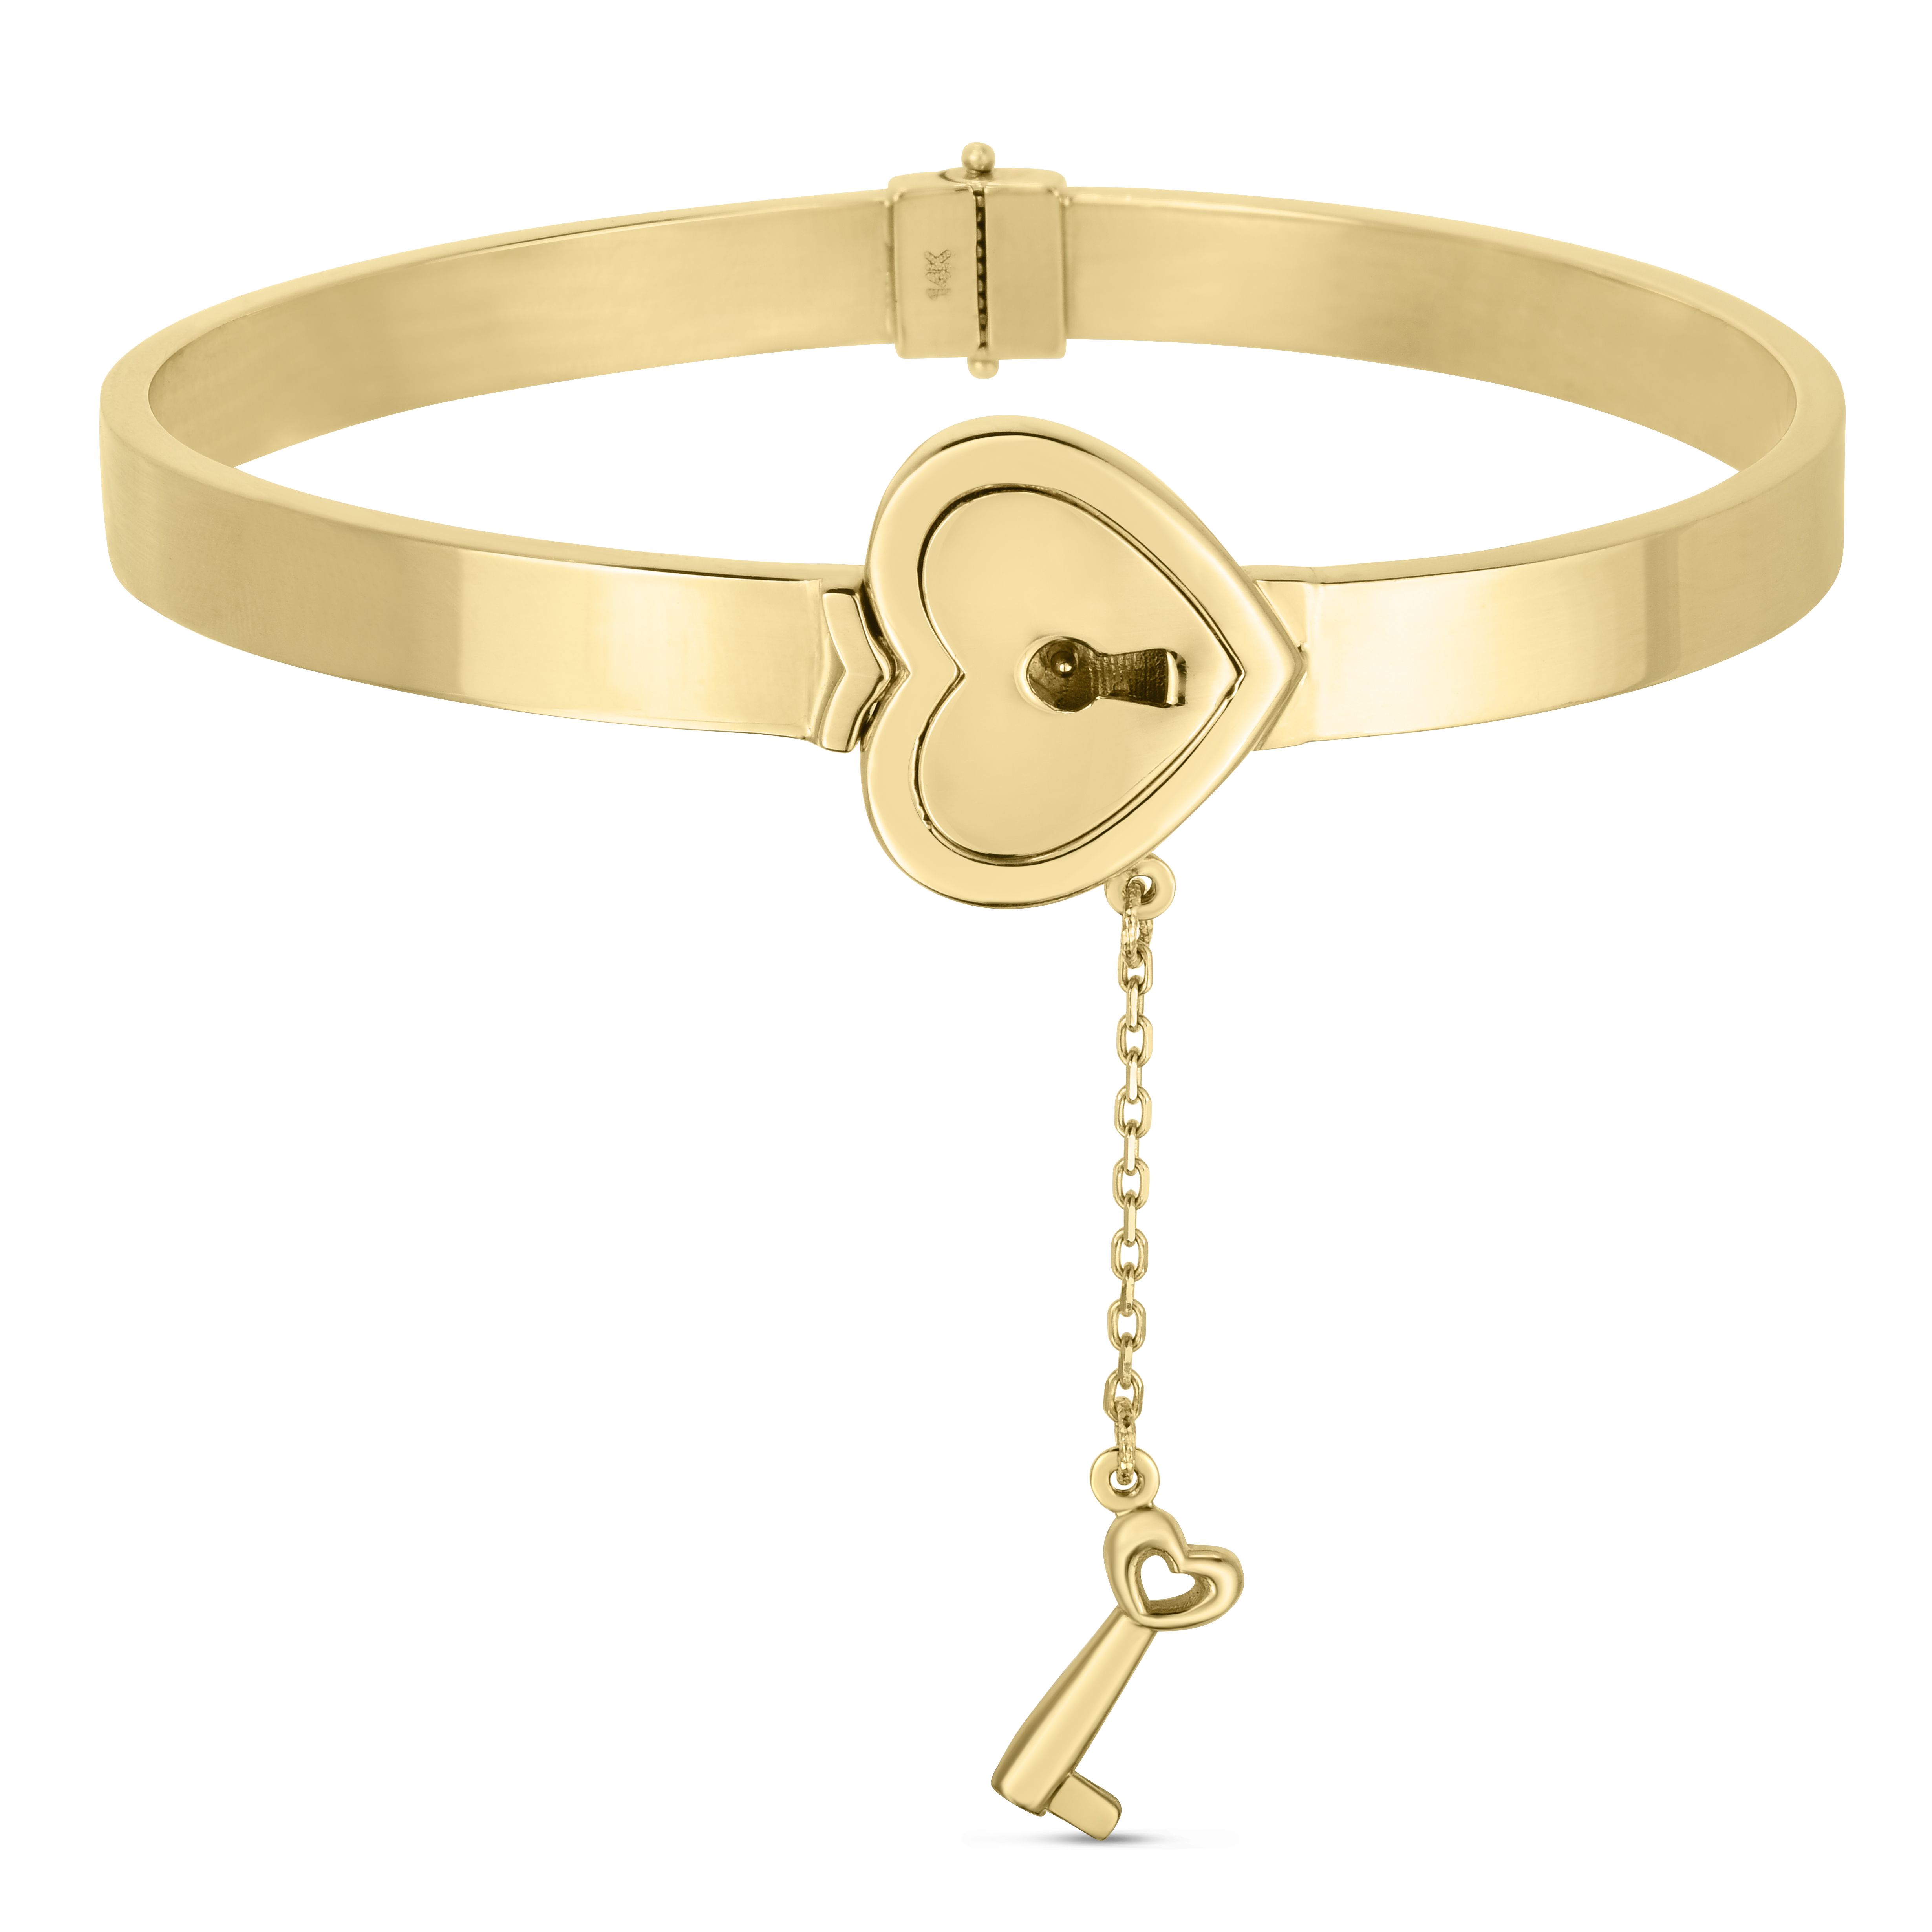 4mm Solid Gold Rope Lock Bracelet | Uverly - UVERLY